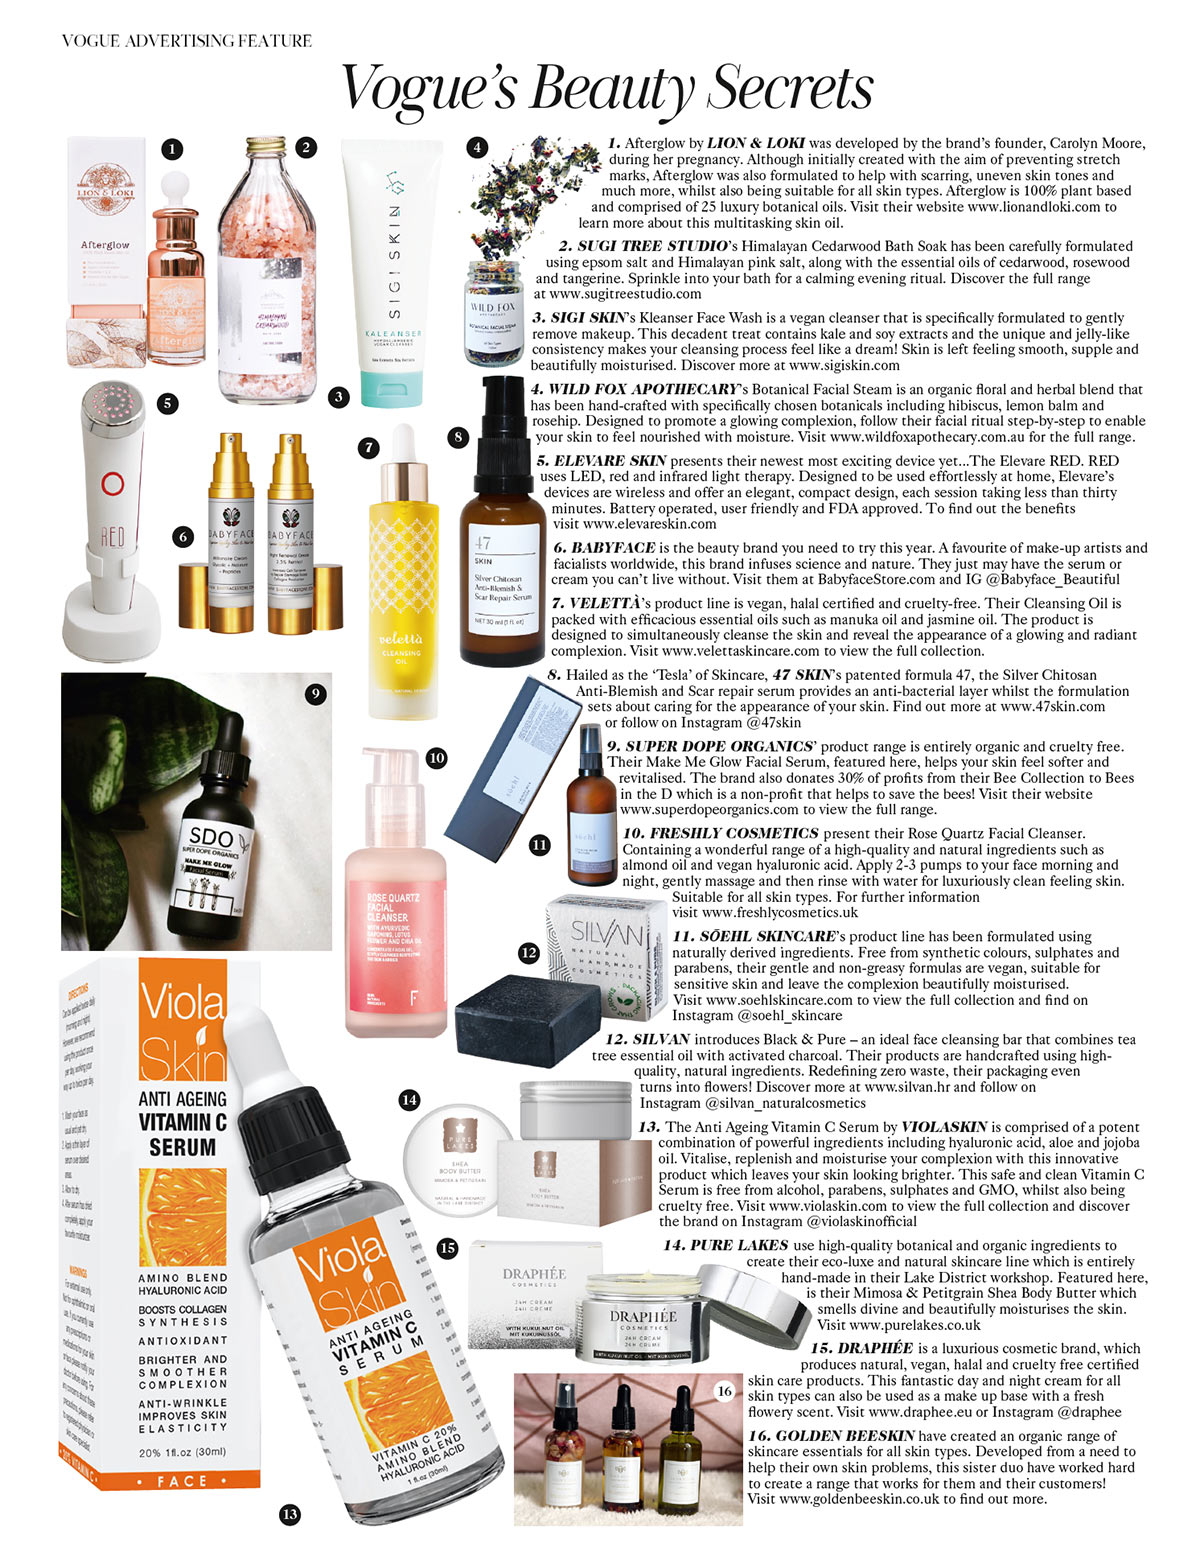 Vogue's Beauty Secrets... feature in Vogue UK magazine that highlights the Red device from Elevare Skin